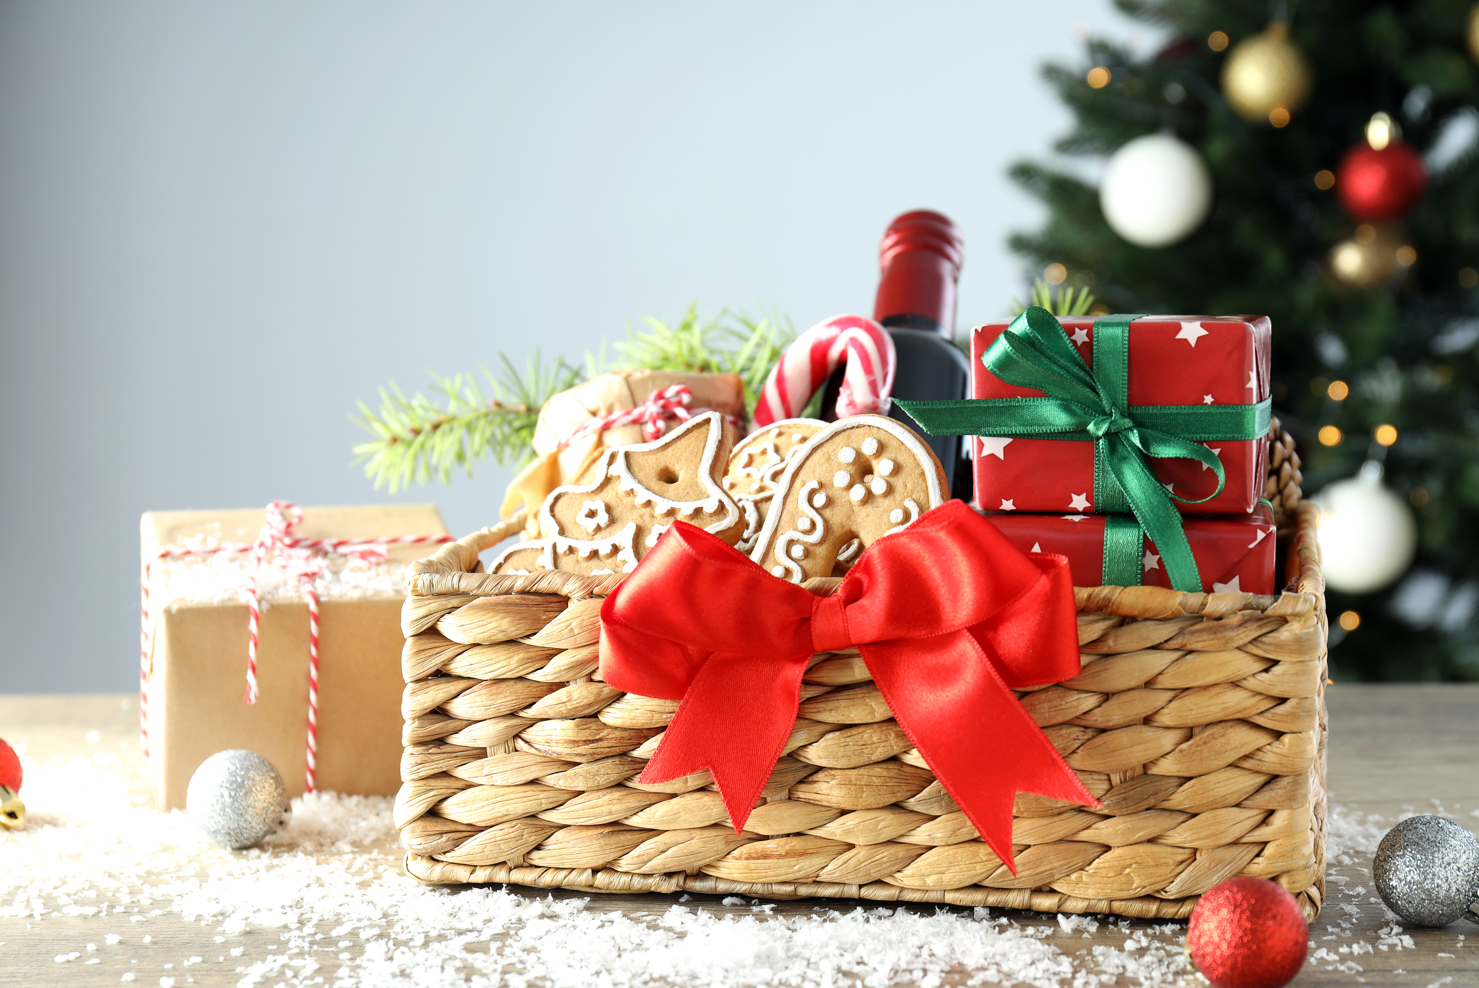 Show Appreciation This Holiday with Corporate Gift Baskets -   Blog